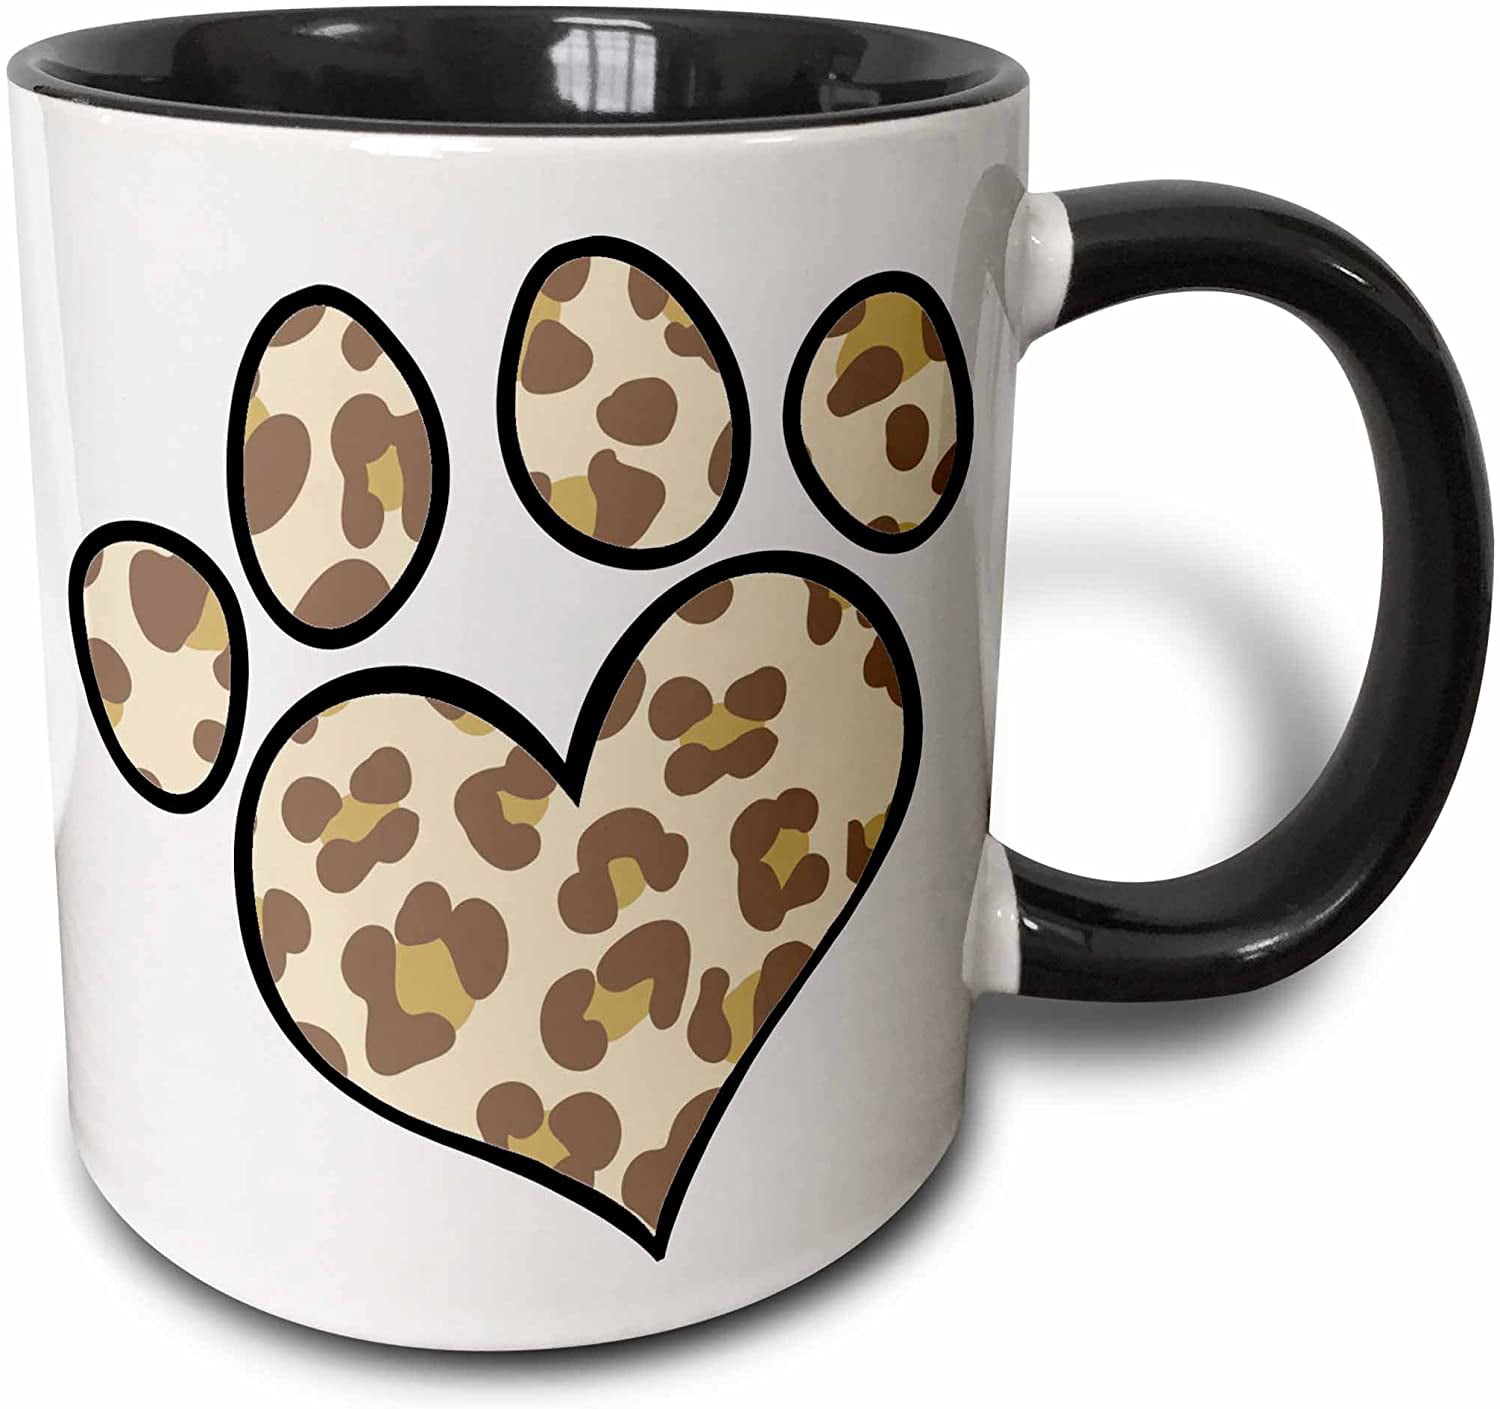 Pens Dog Lover Gift Candy Dog Heart Paws 15 oz Coffee Mug Fill With Treats